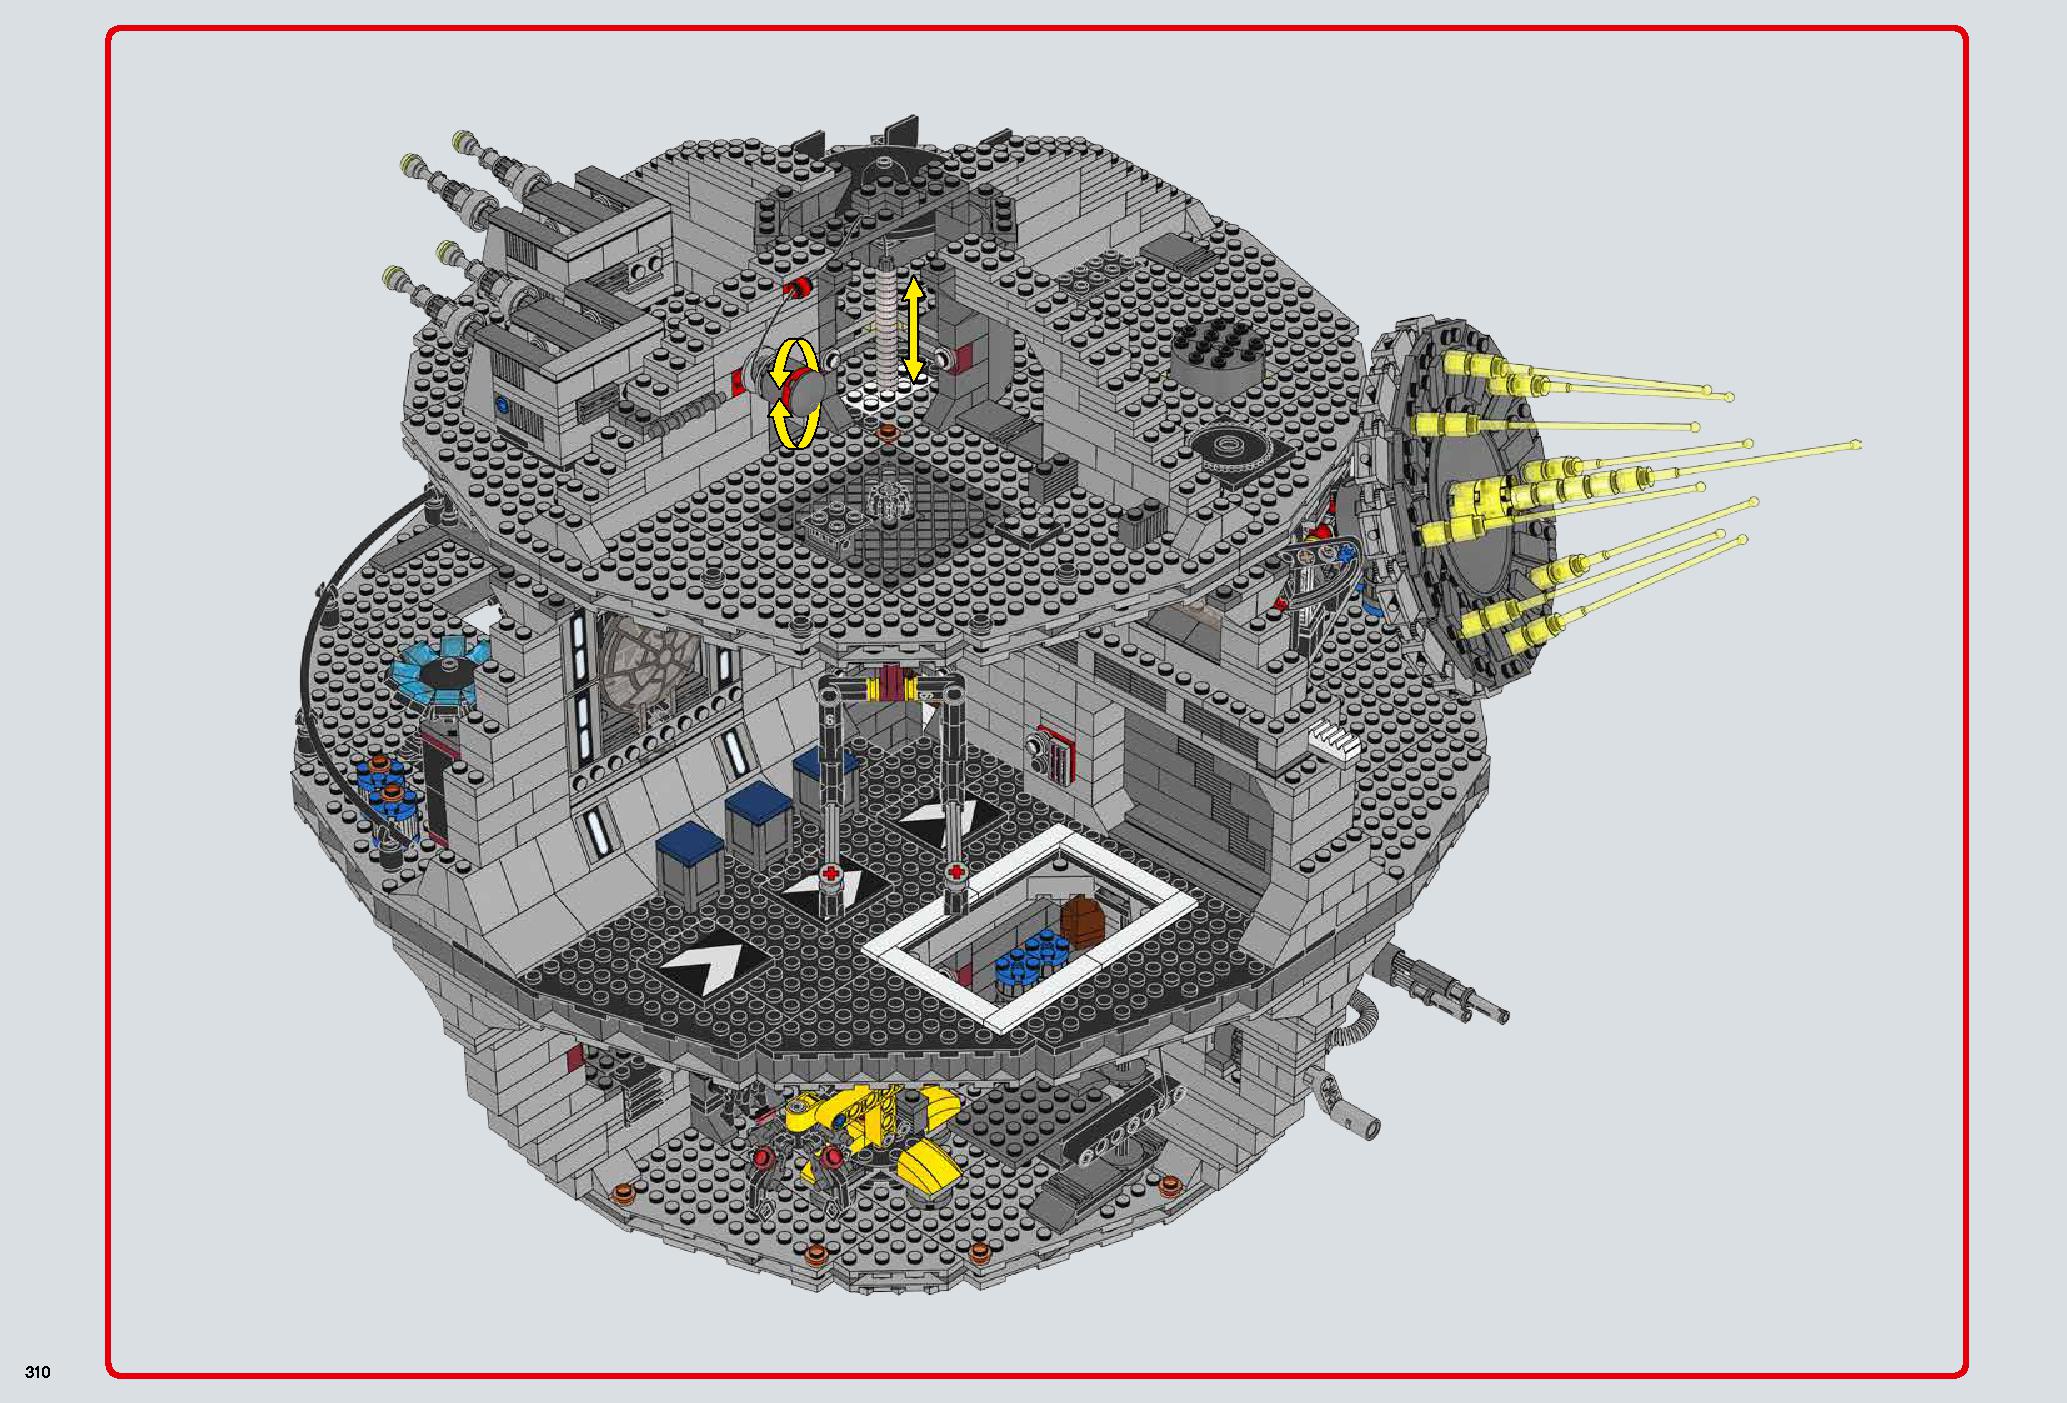 Death Star 75159 LEGO information LEGO instructions 310 page